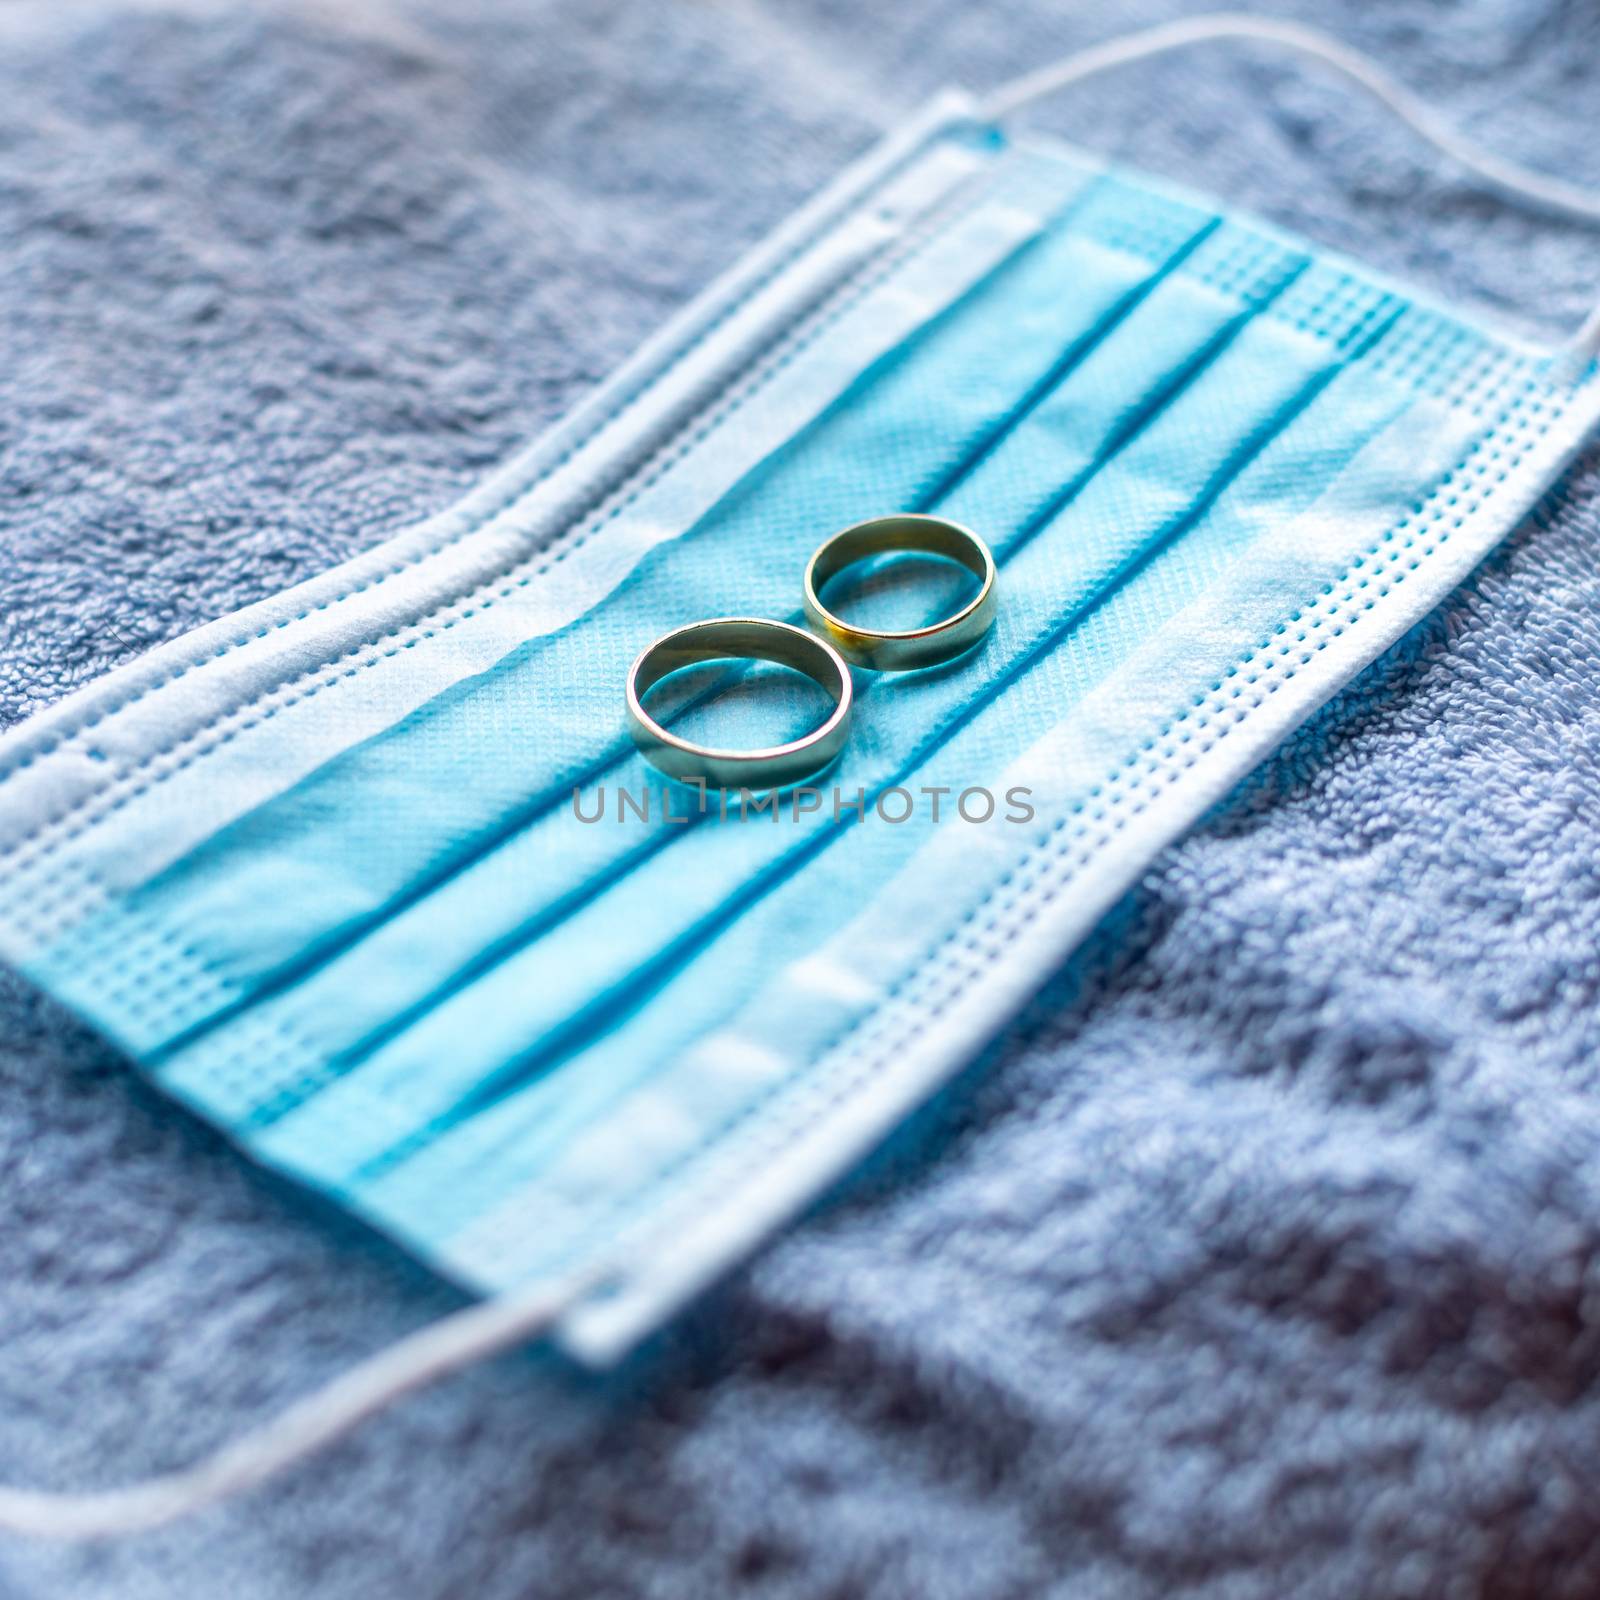 Wedding rings with face mask Corona facemasks by adamr